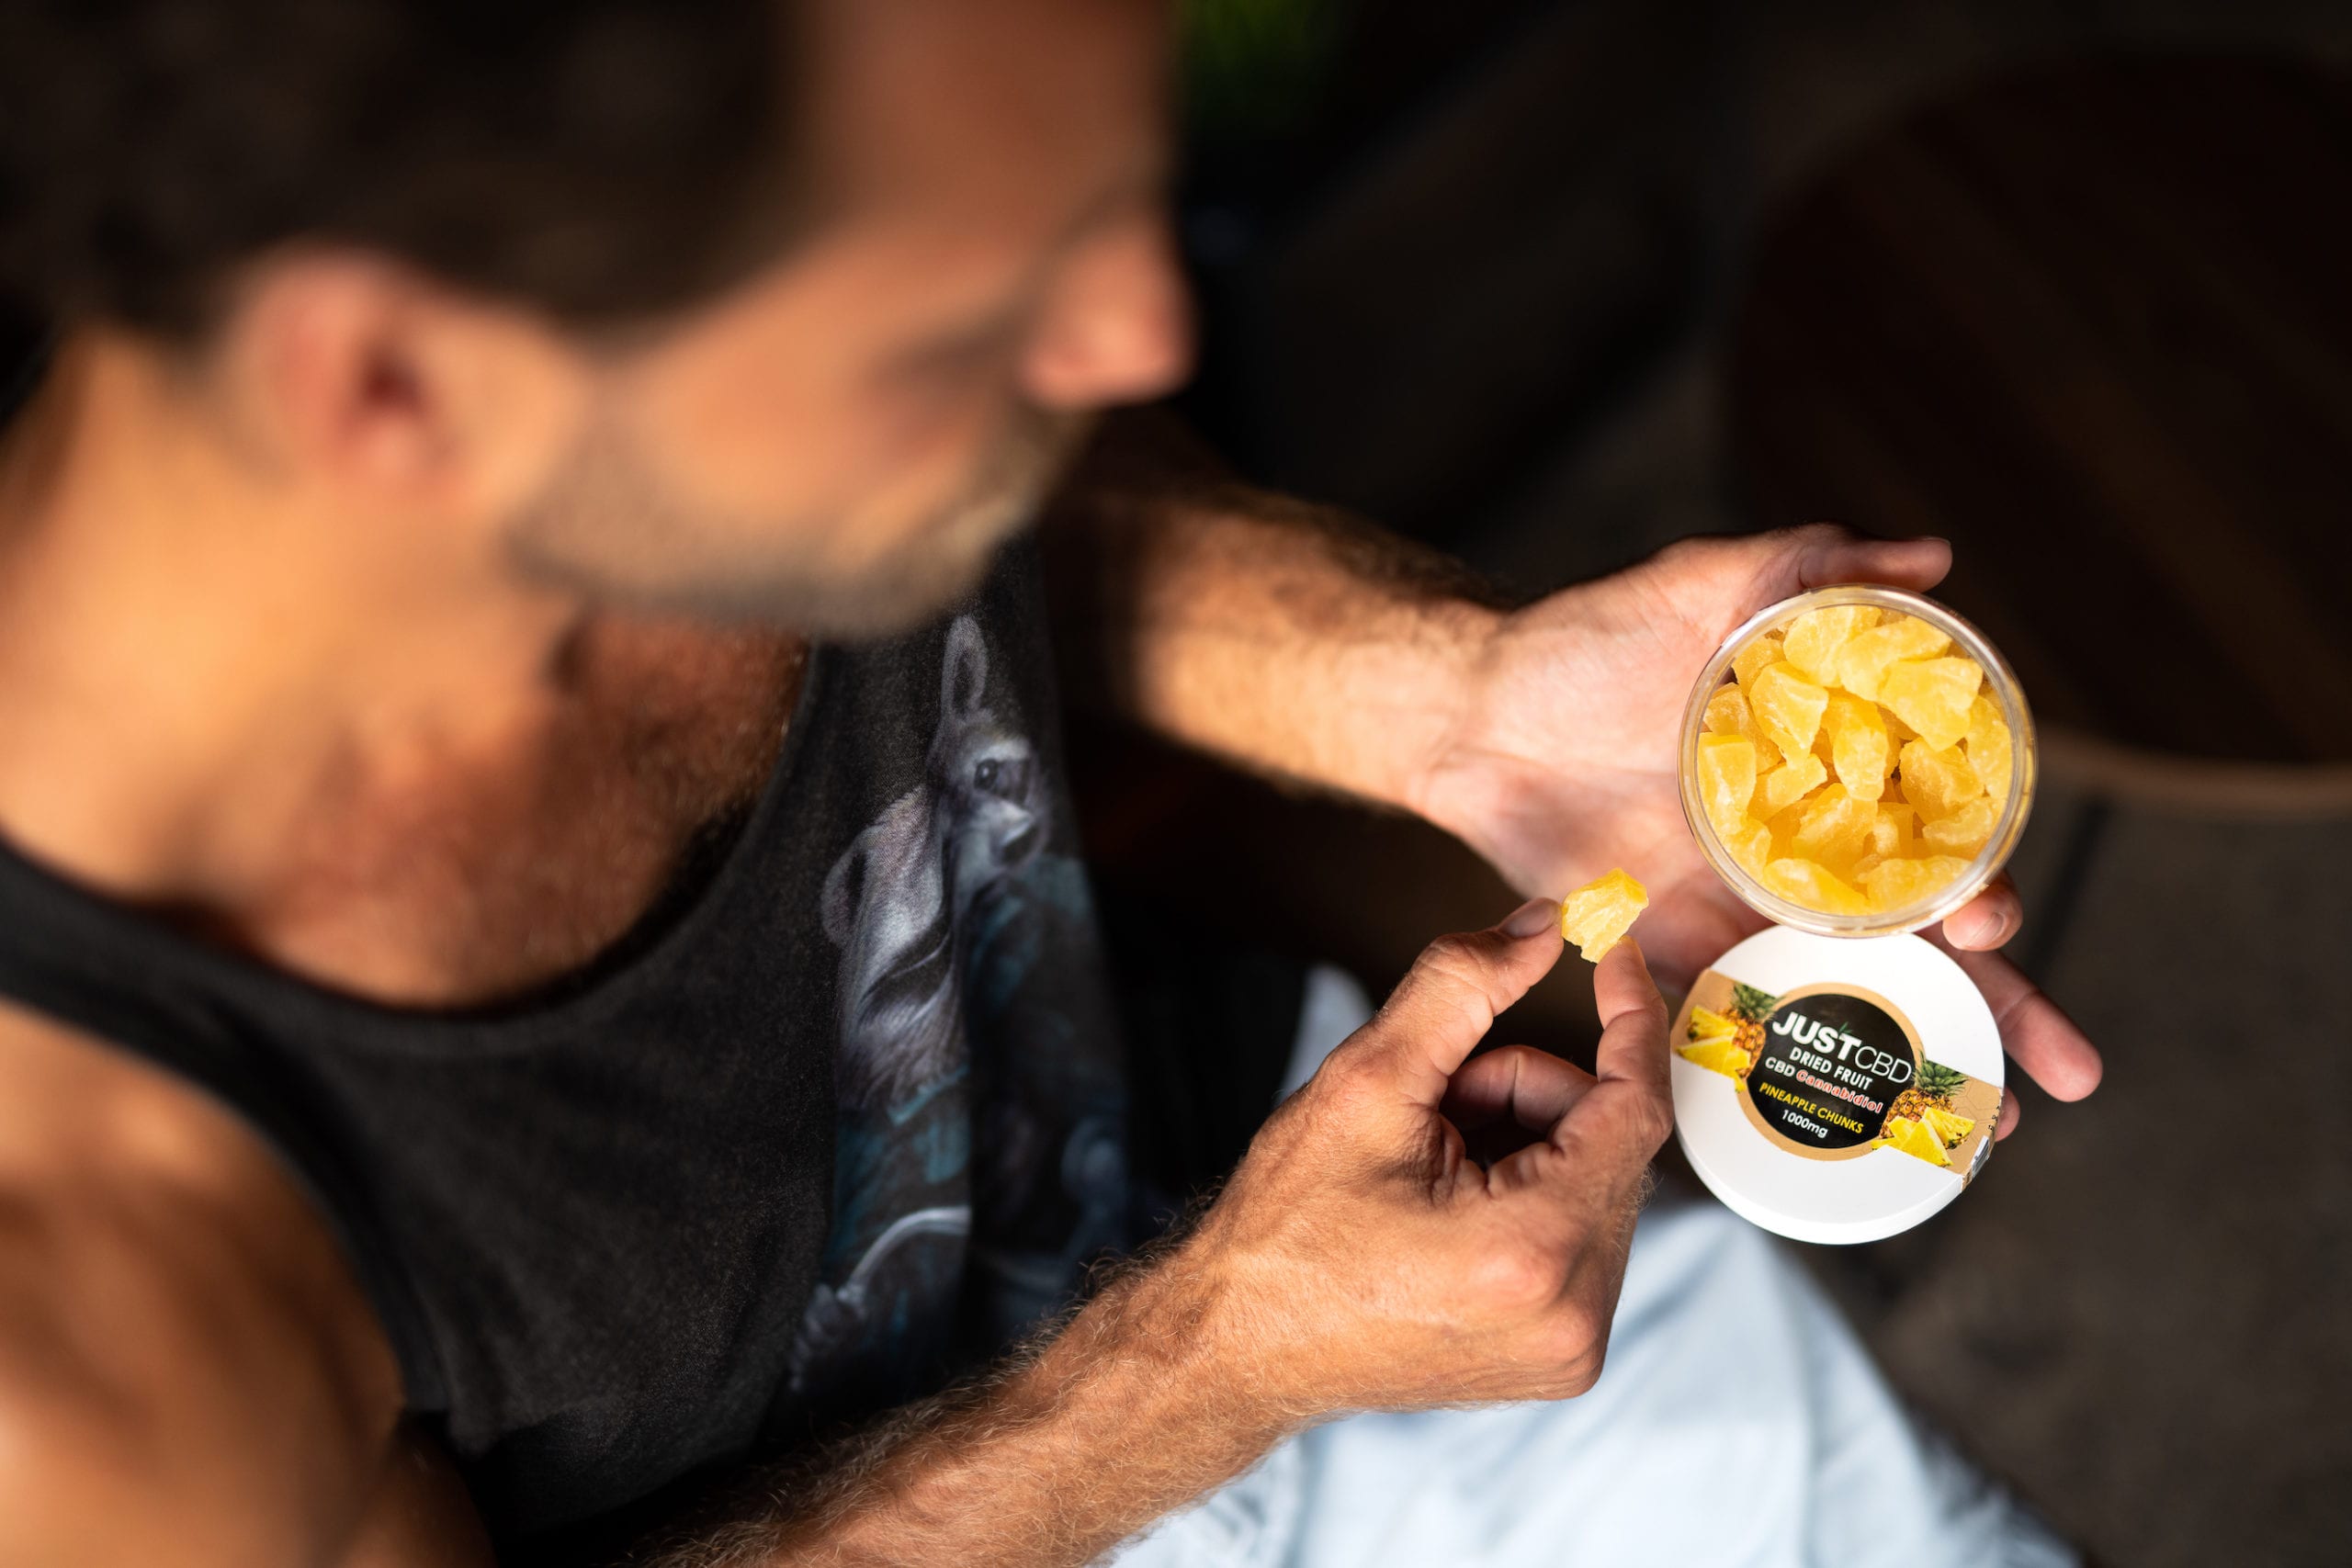 JustCBD Products and JustCBD Product Photography Overhead view of a man taking a pineapple chunk from JUSTCPD dried fruit container